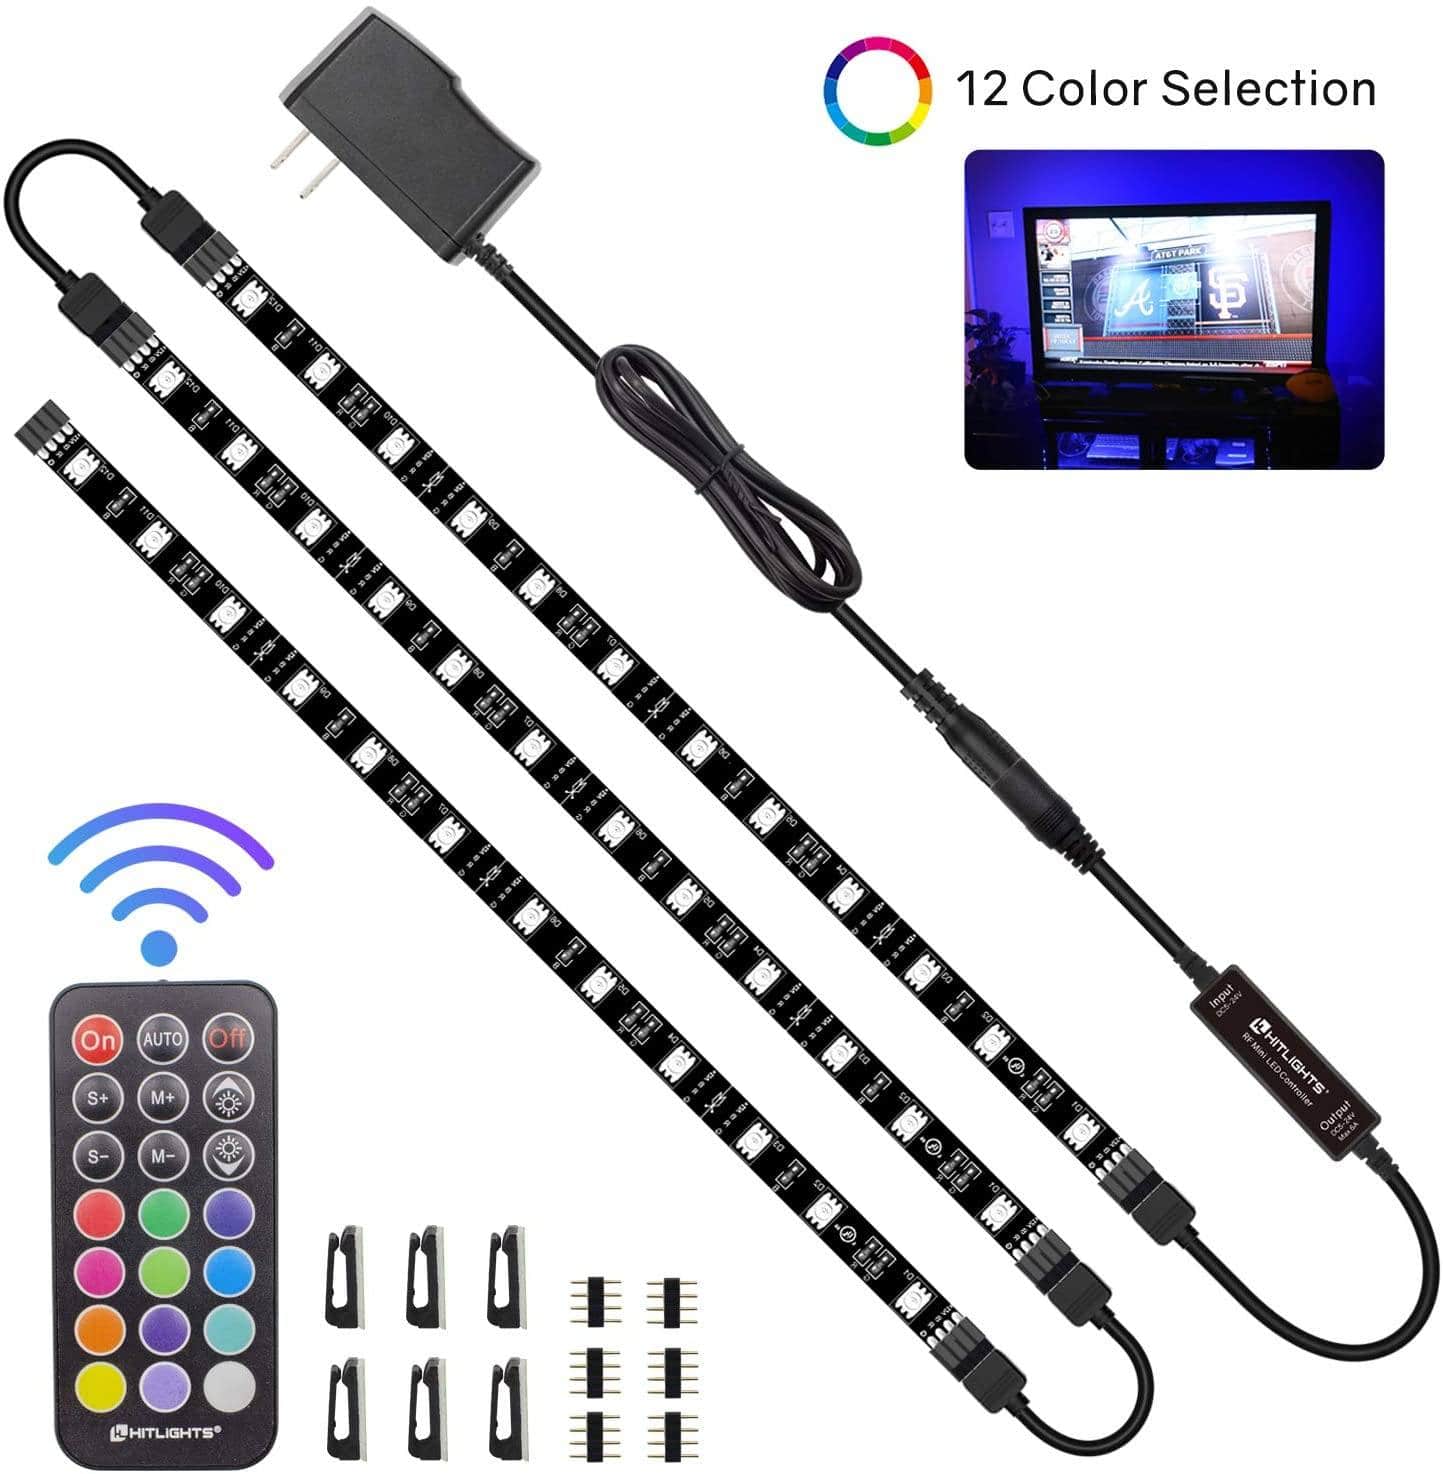 4 Pre-Cut 1ft/4ft Small LED Light Strips Dimmable, RGB 5050 Color Chan